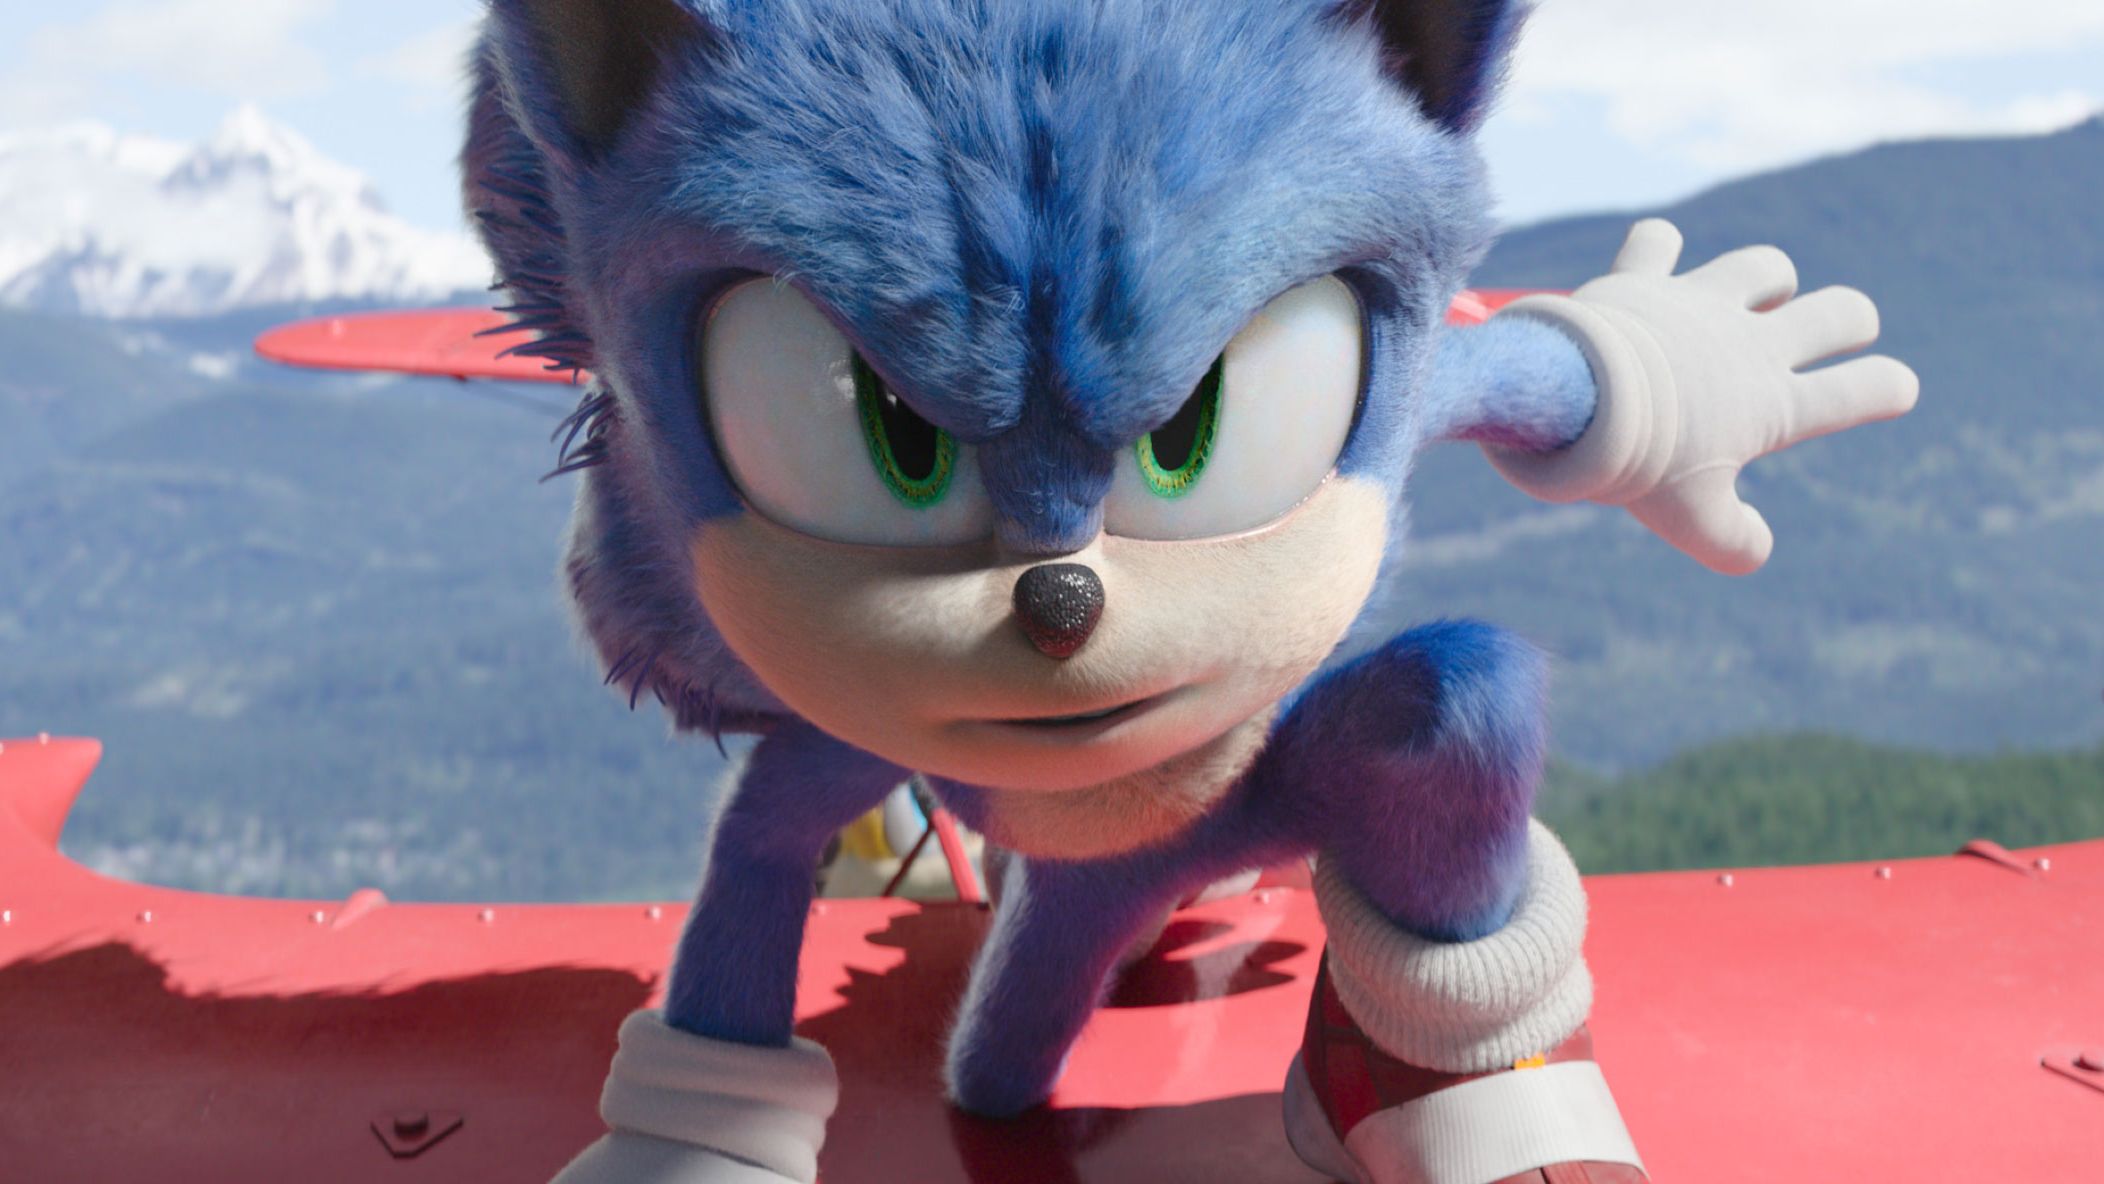 Exclusive: I found an unused Knuckles render in the official Sonic movie  sequel poster. Here's how it happened. - Tails' Channel